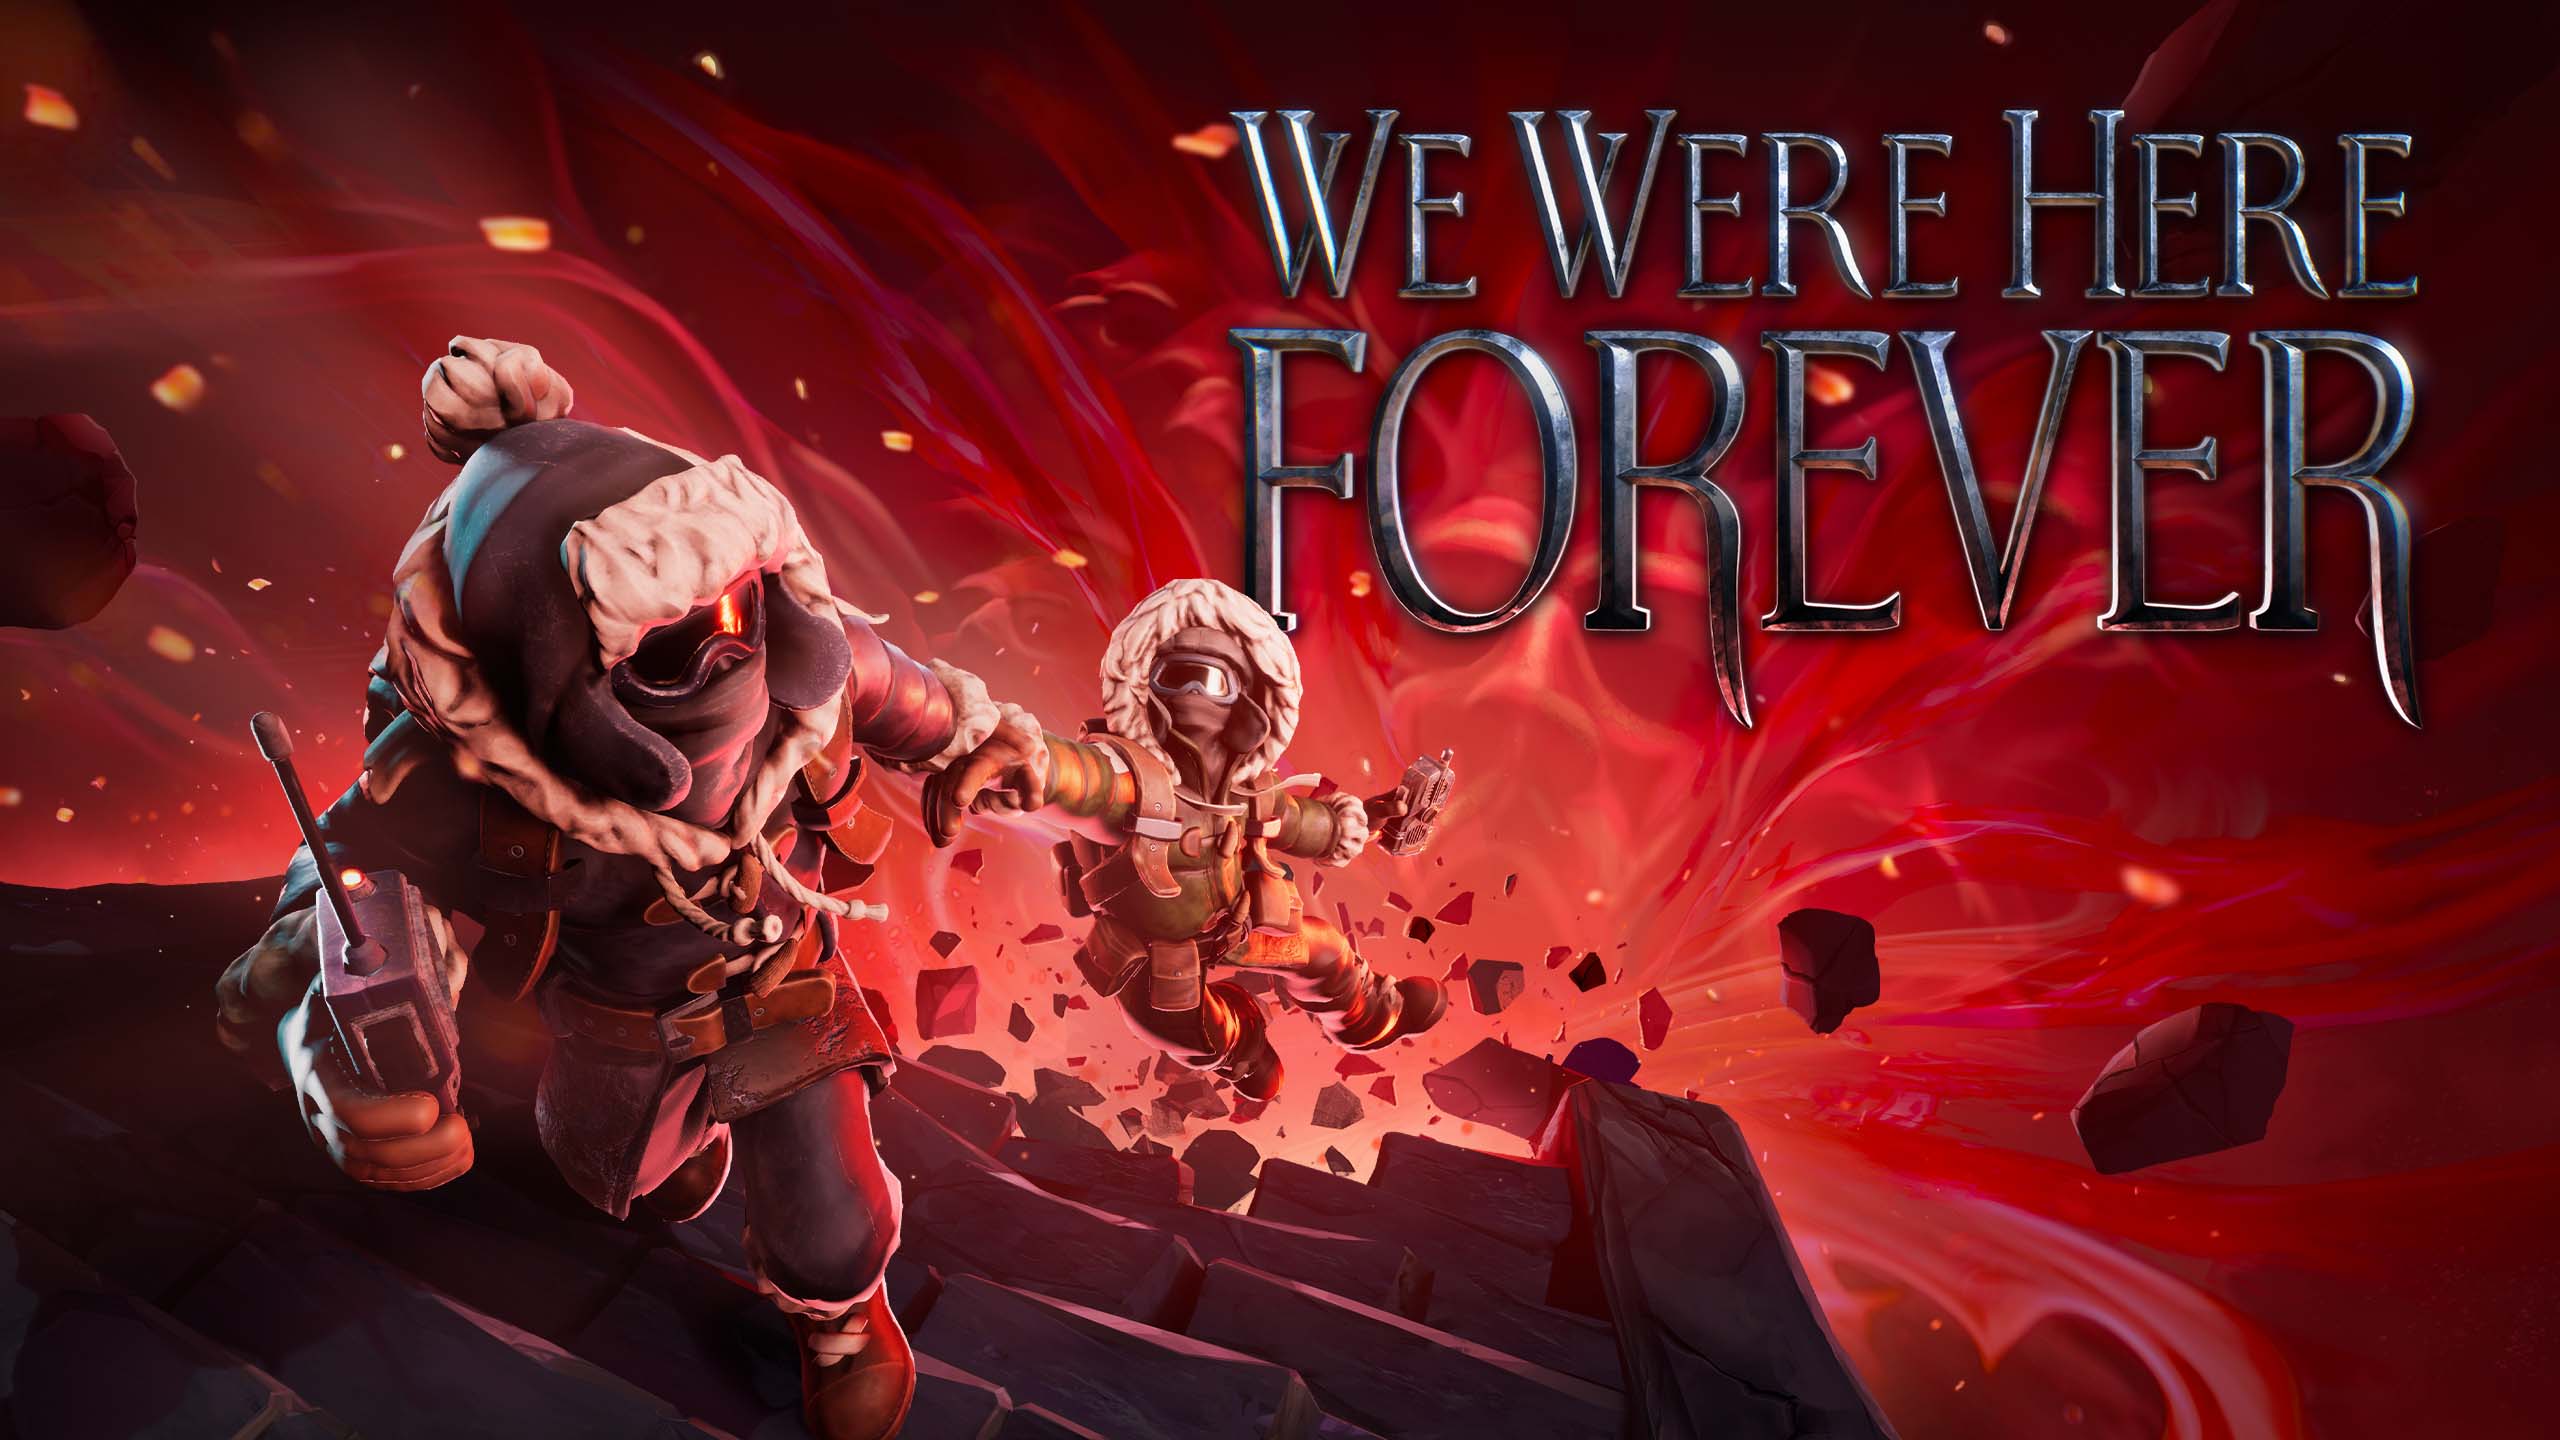 We Were Here Forever Promotional Image